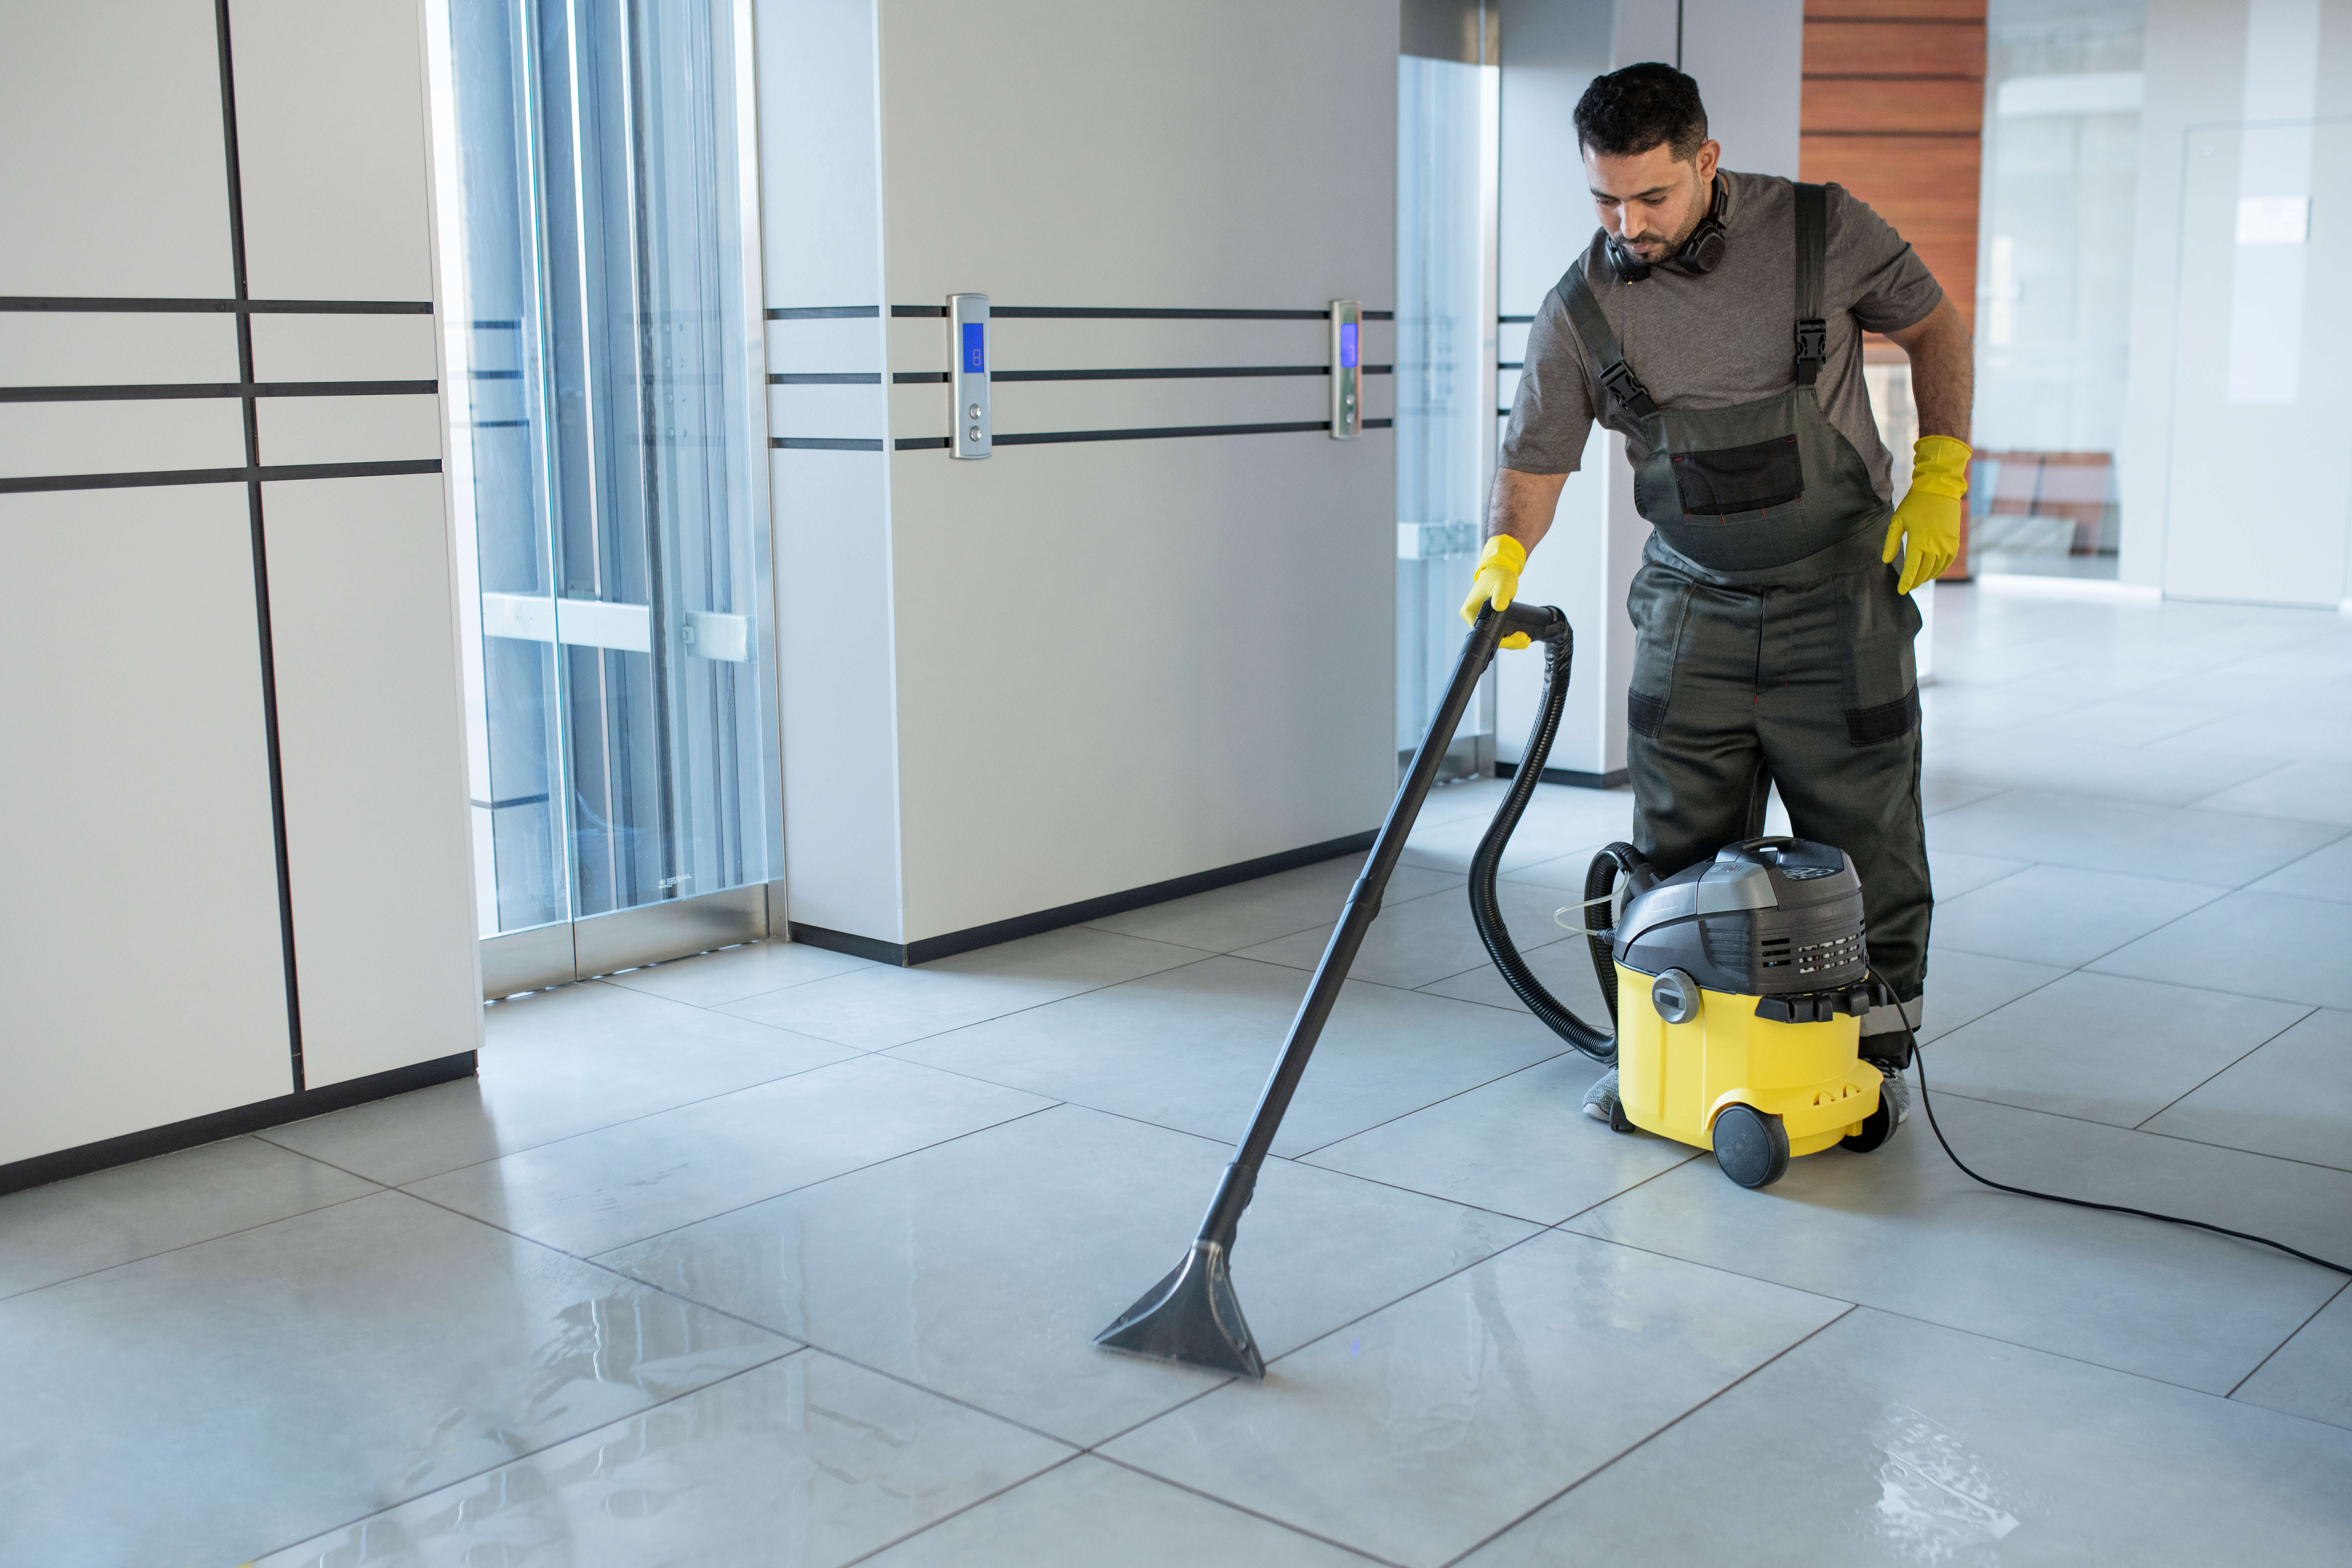 Start your business journey with floor cleaning franchise